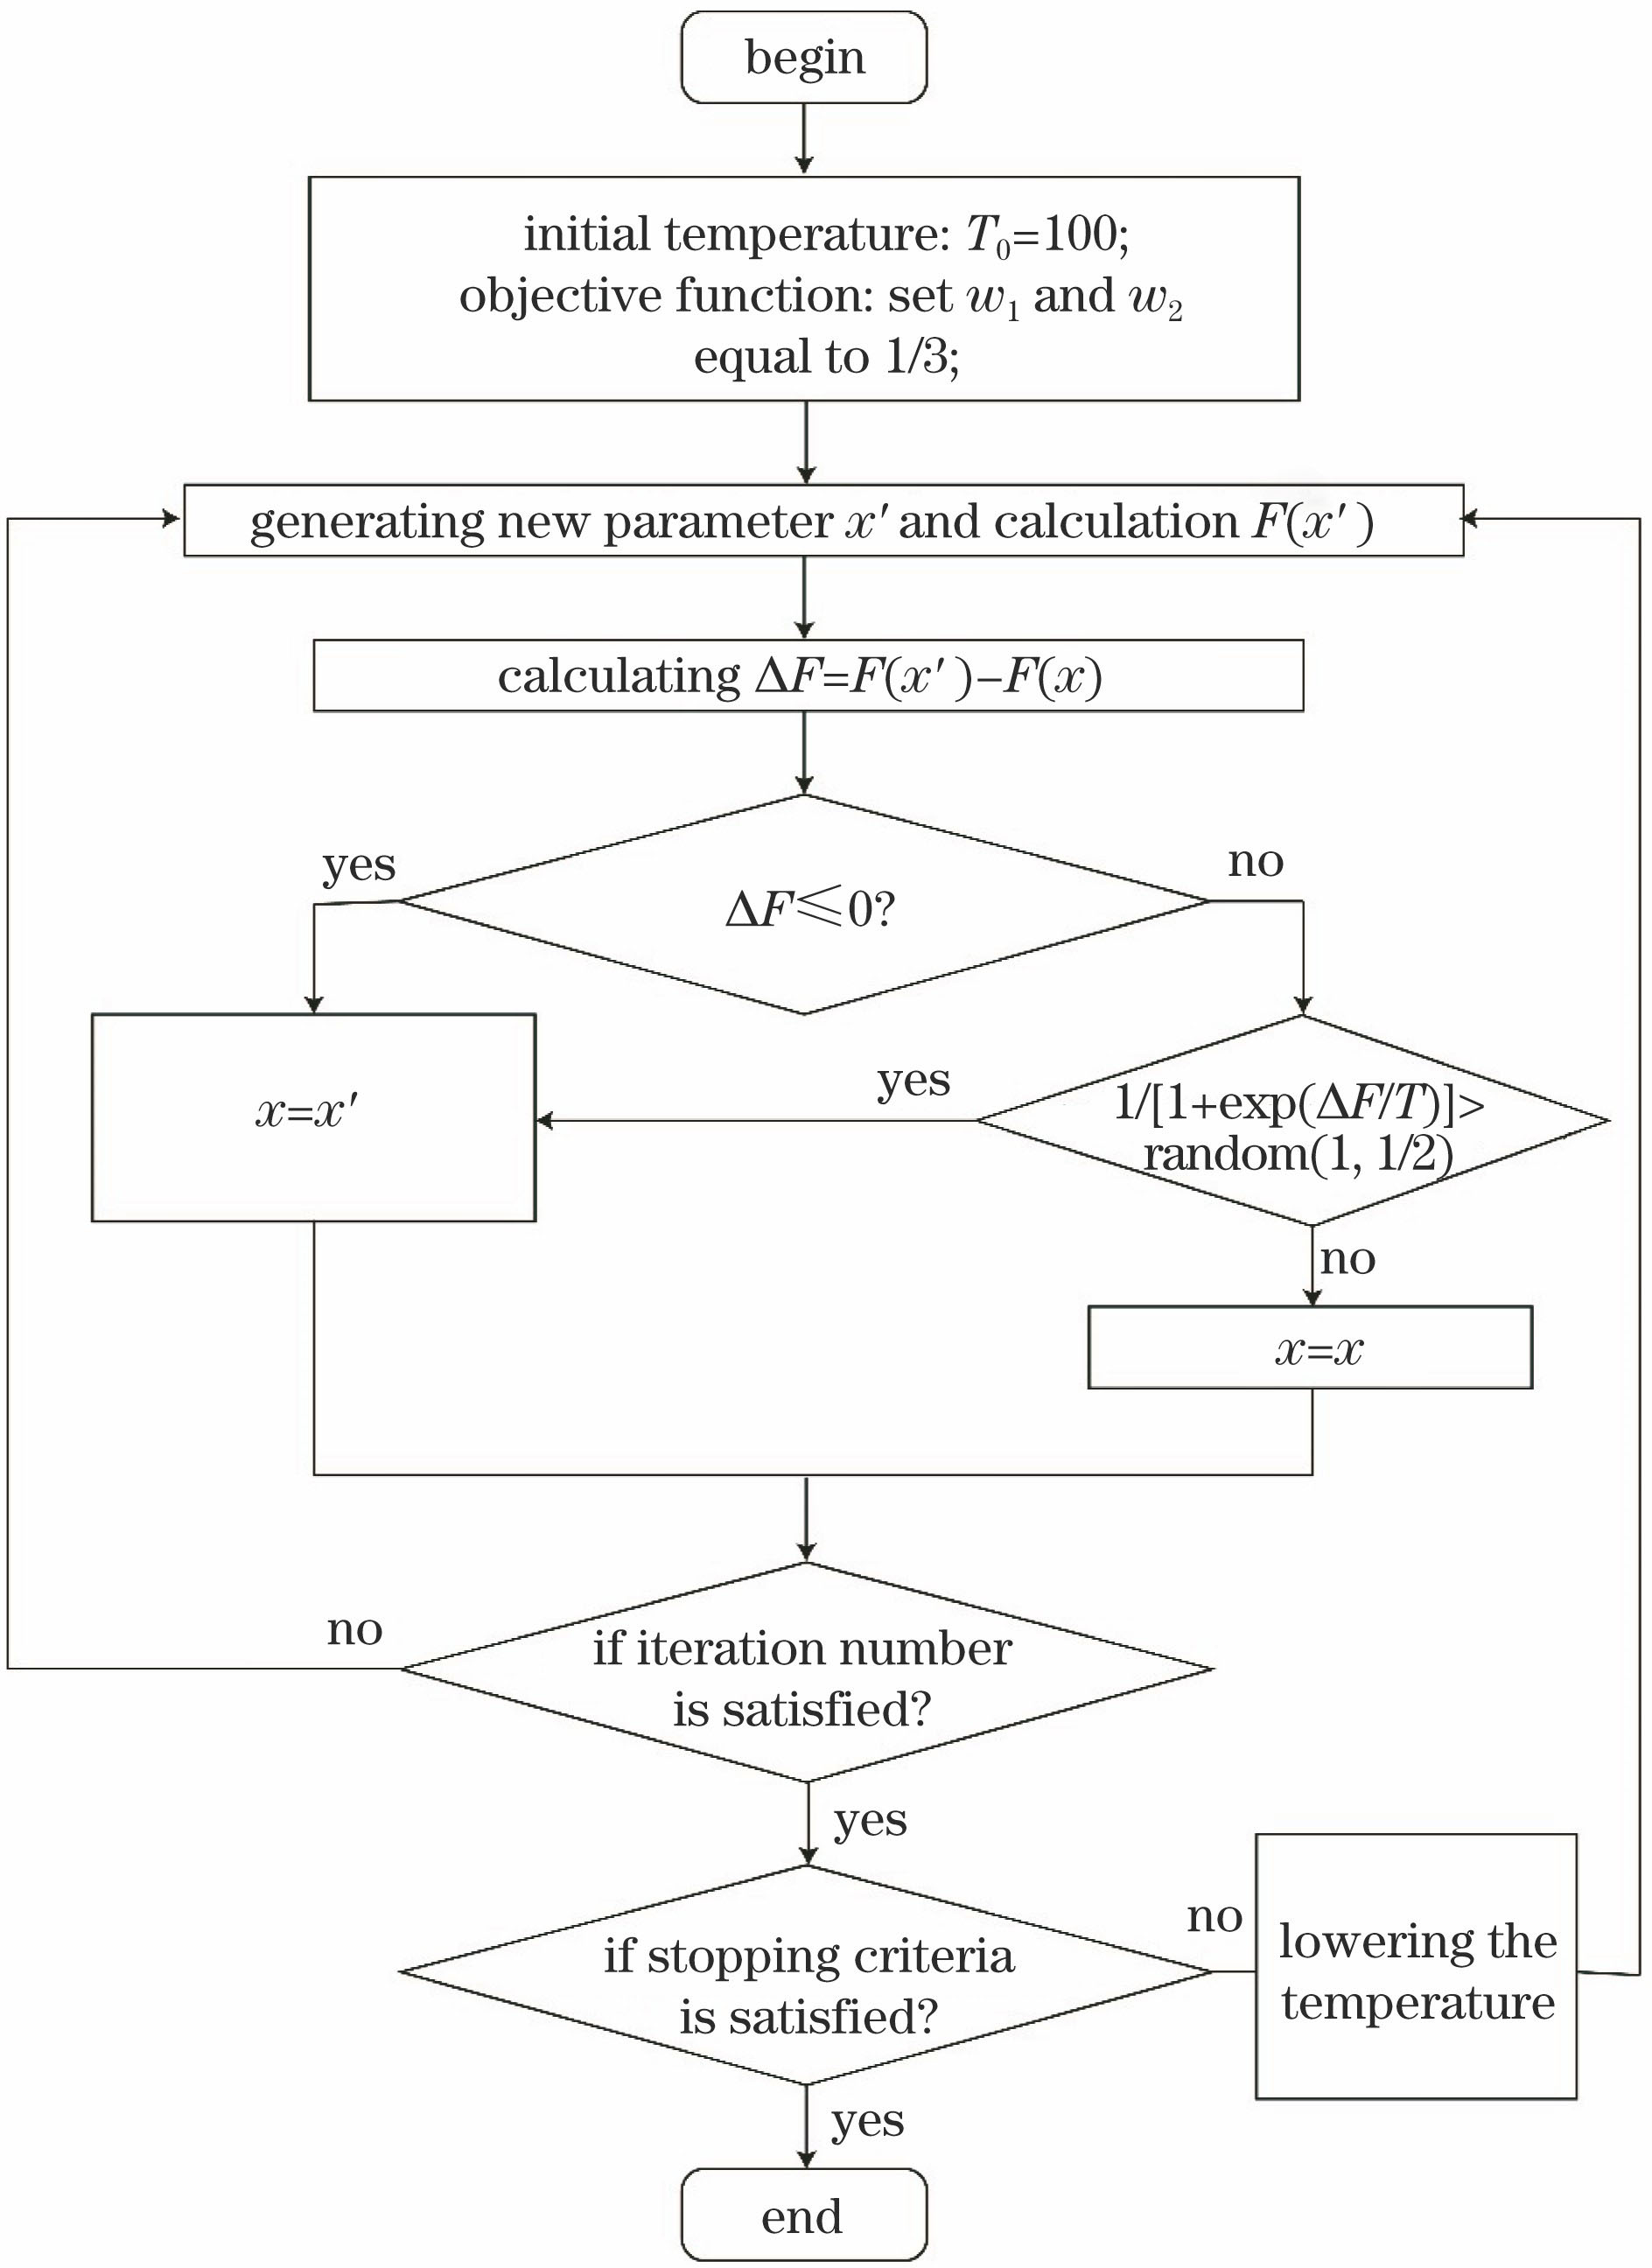 Flowchart of simulated annealing algorithm